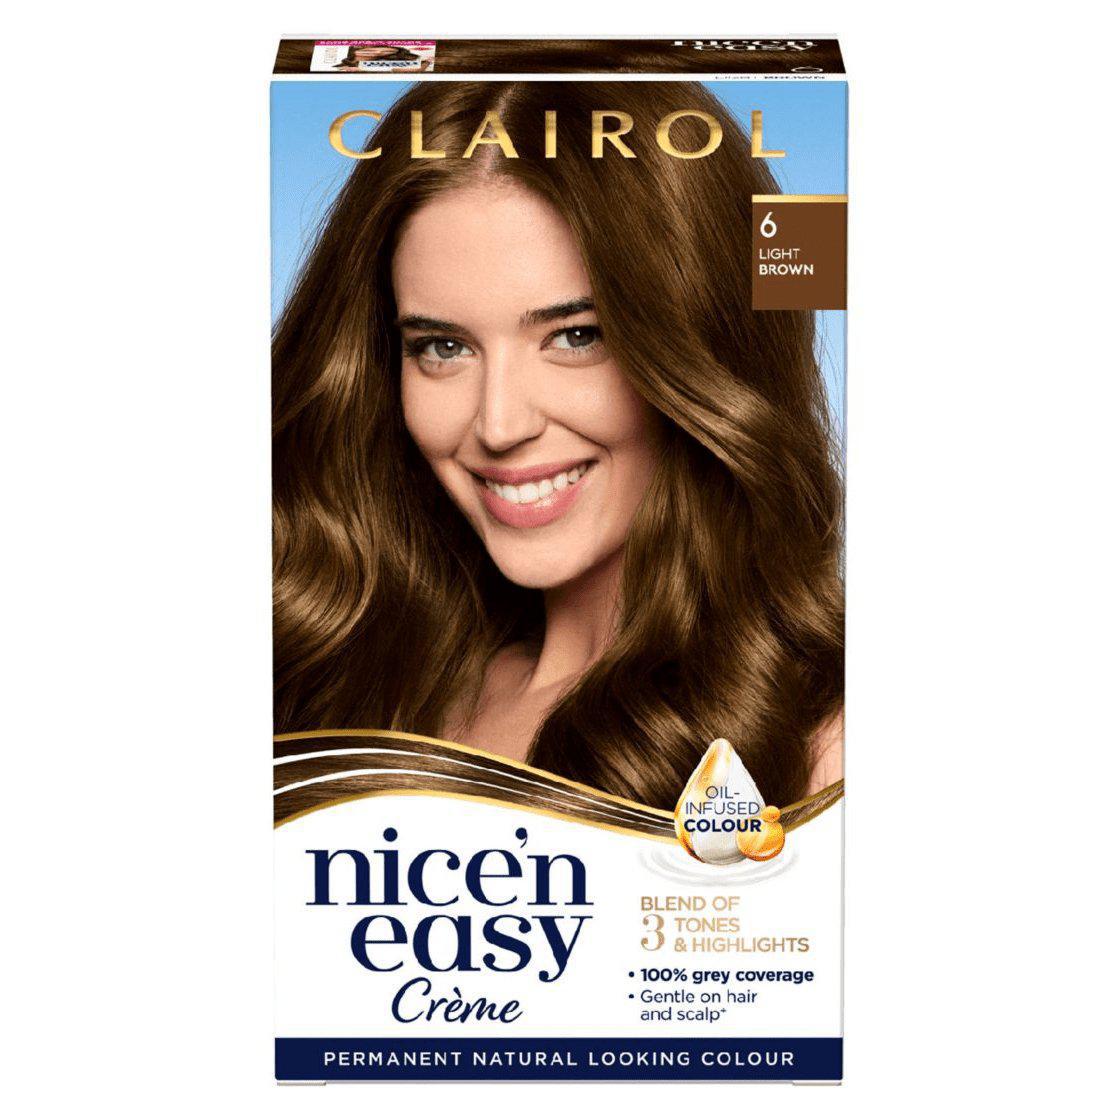 Clairol Nice N Easy Crème Natural Looking Permanent Hair Dye - 6 Light Brown - Healthxpress.ie